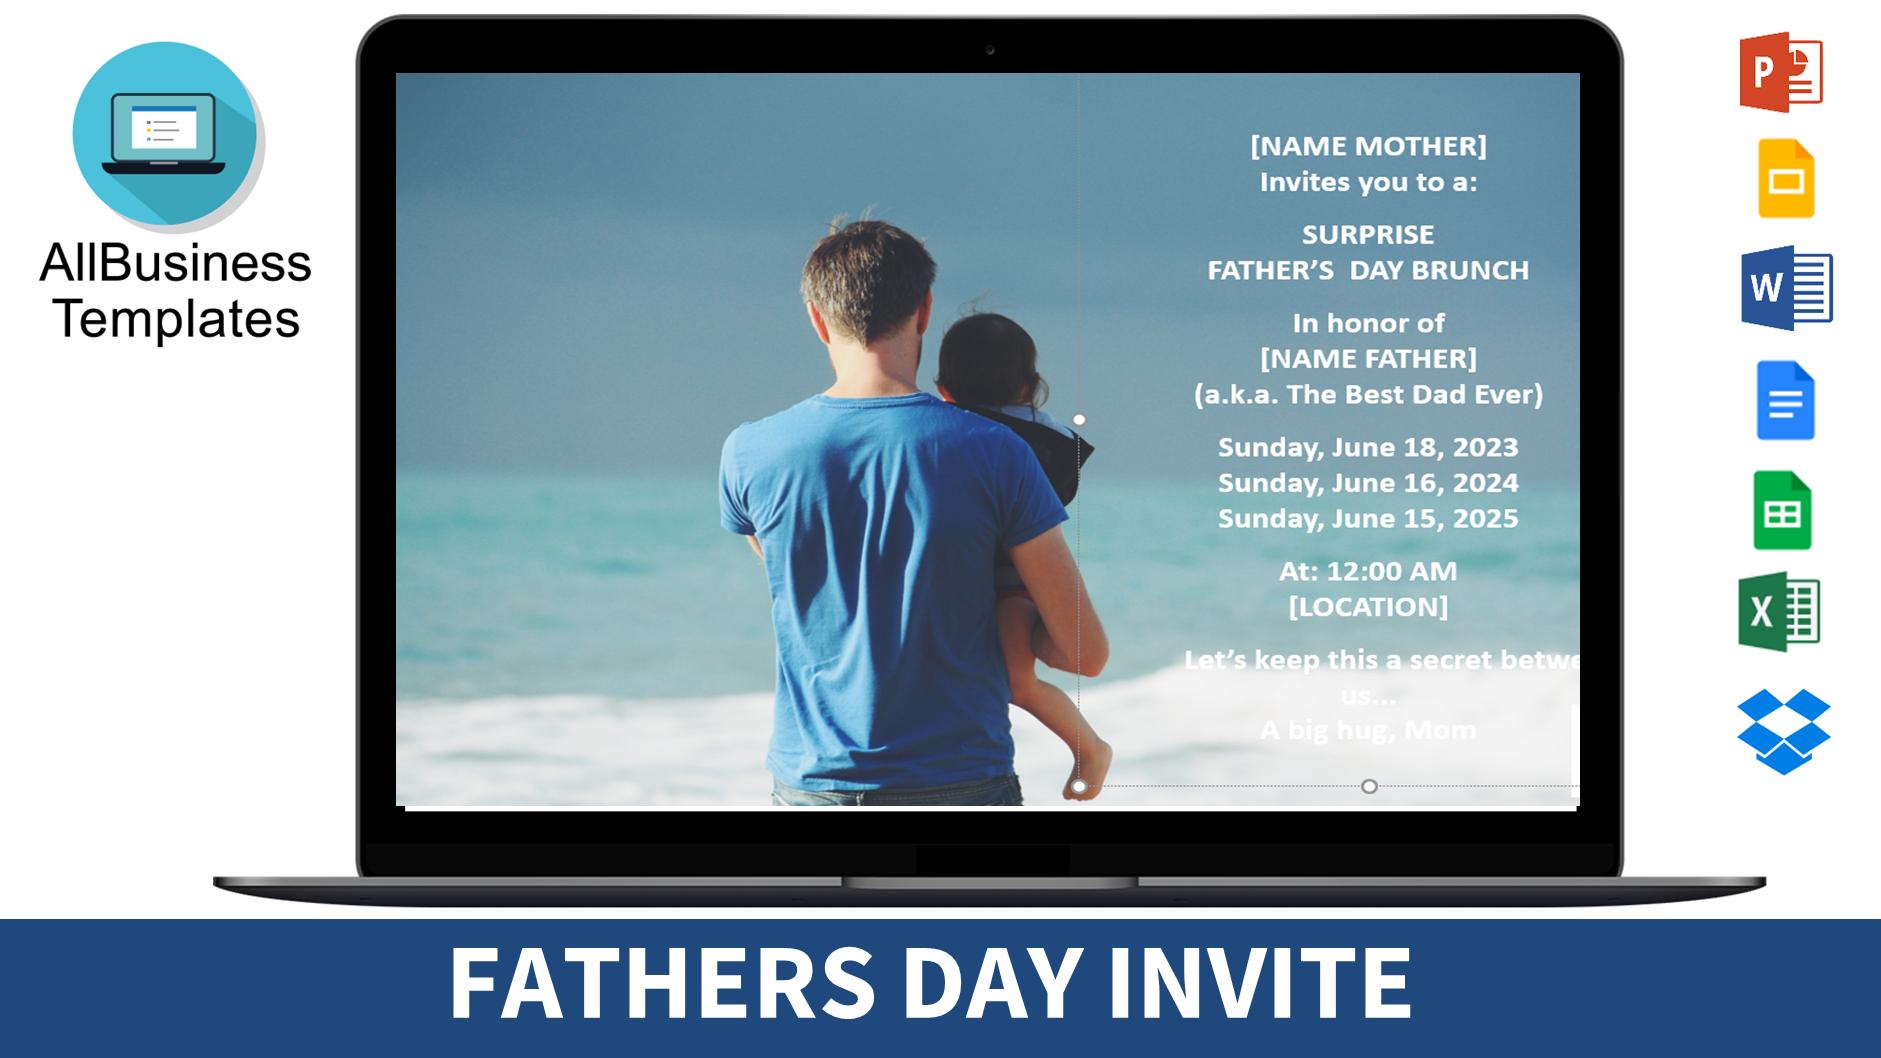 Fatherday Brunch Invitation as Gift main image